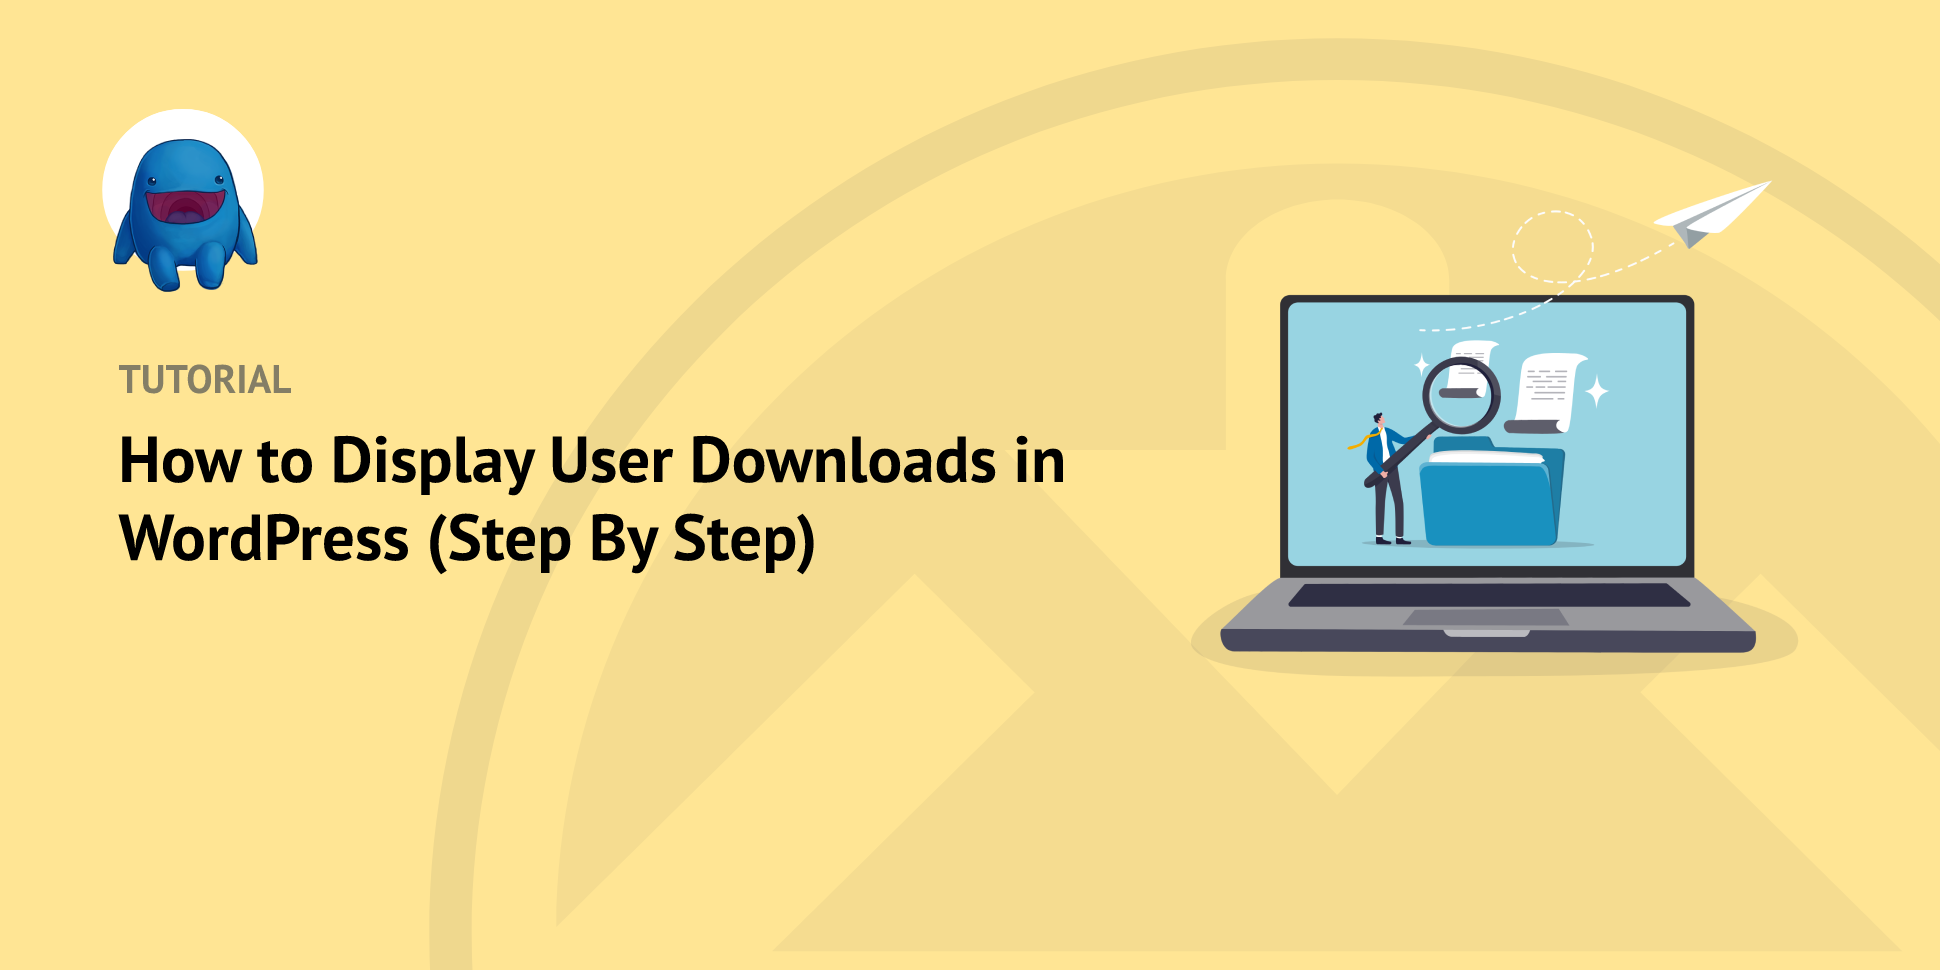 How to Display User Downloads in WordPress & Download History